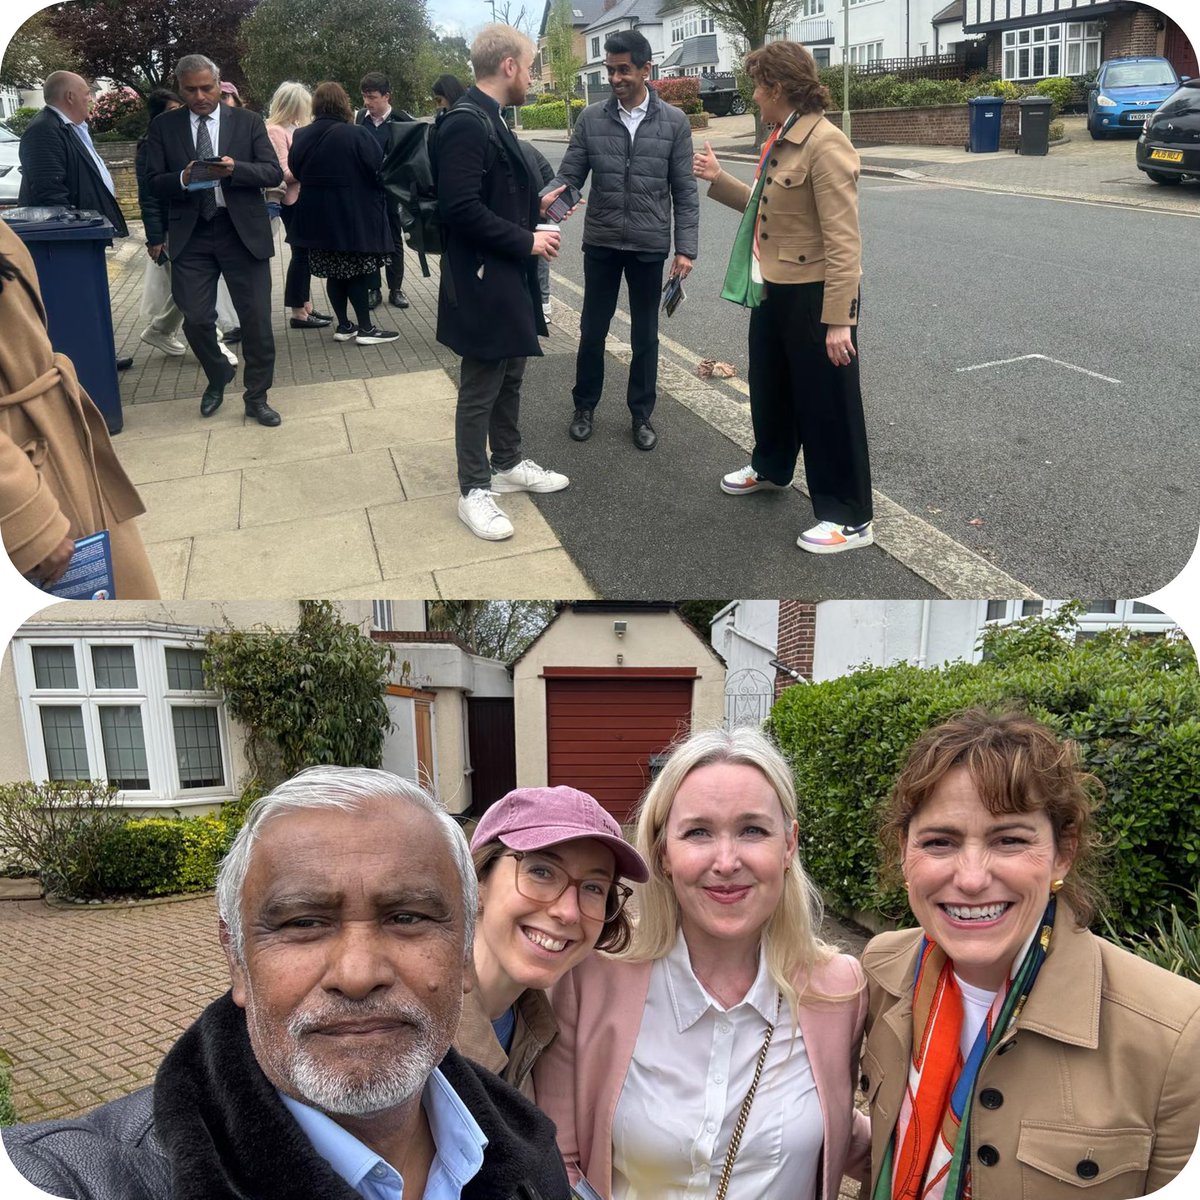 CBNI team members alongside fellow Conservatives campaigns with Cllr Ameet Jogia PPC Hendon . Islam one of our core campaigners was present with his friends to support @Ameet_Jogia @TeamLondonUK @ChrisVinante @Conservatives